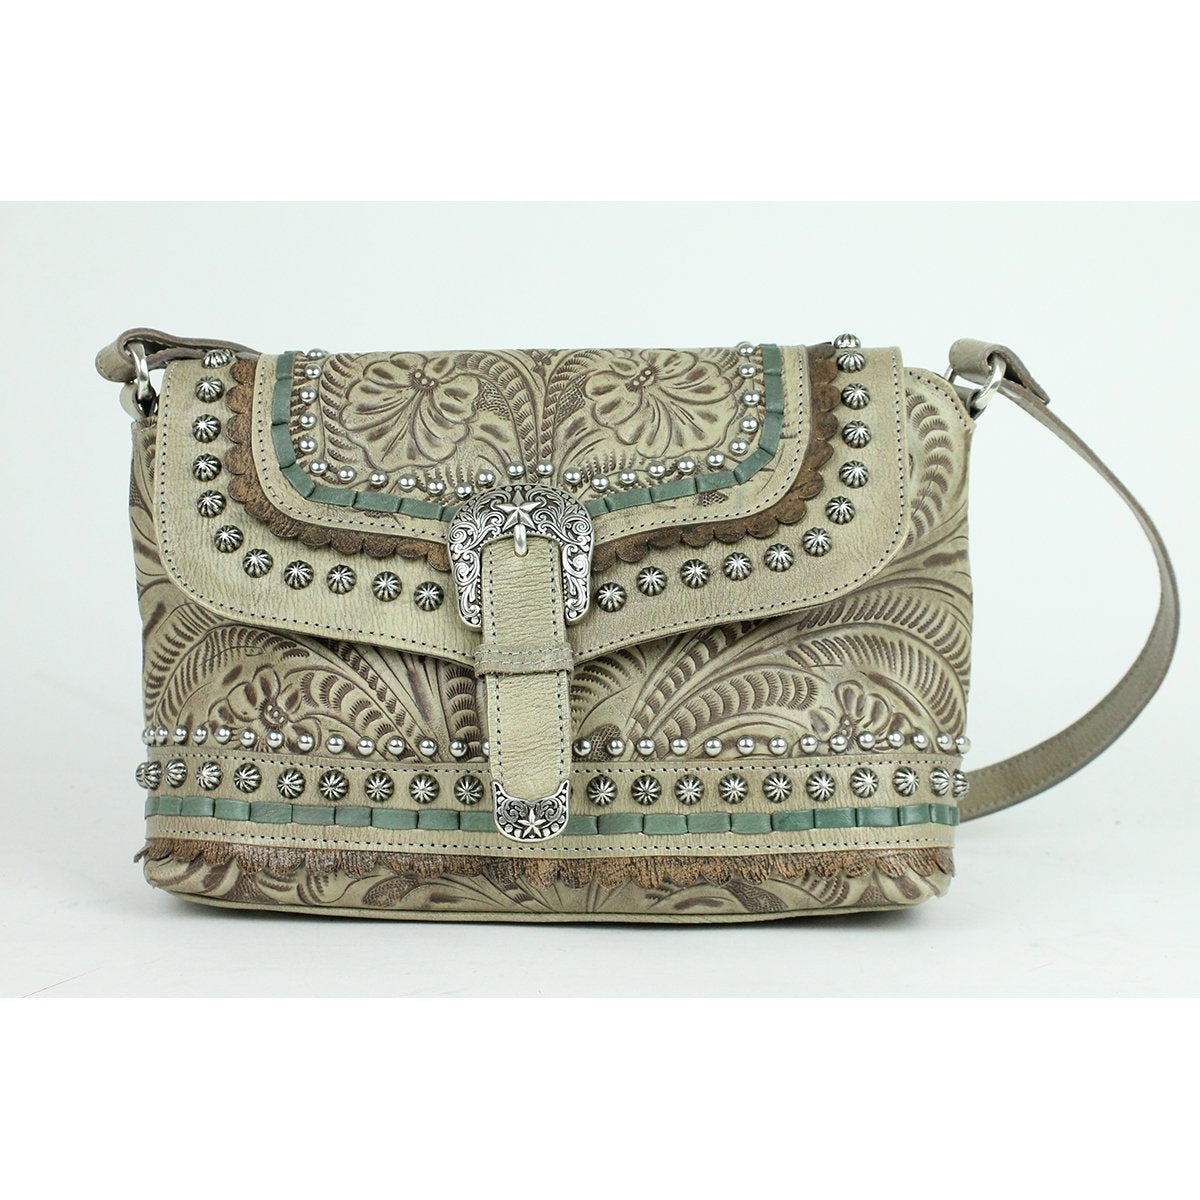 Crossbody Flap Bag with Decorative Buckle and Studs Sand